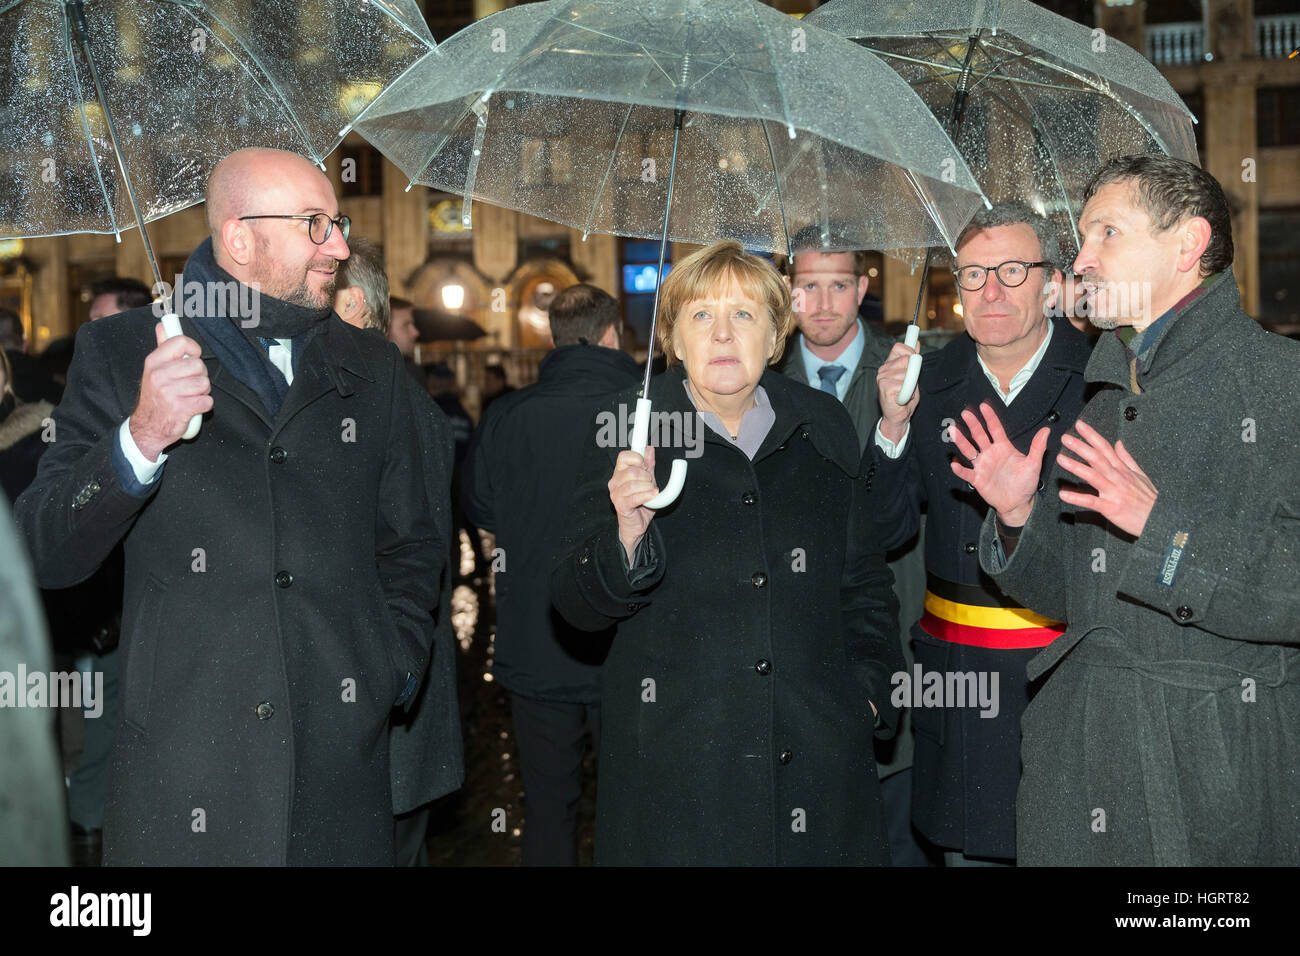 Brussels, Belgium. 12th Jan, 2017. The German Chancellor Angela Merkel (CDU) with the Belgian Prime Minister Charles Michel (L) and the Mayor of Brussels Yvan Mayeur (2-R) in front of the Grand Palace in Brussels, Belgium, 12 January 2017. Photo: Thierry Monasse/dpa/Alamy Live News Stock Photo